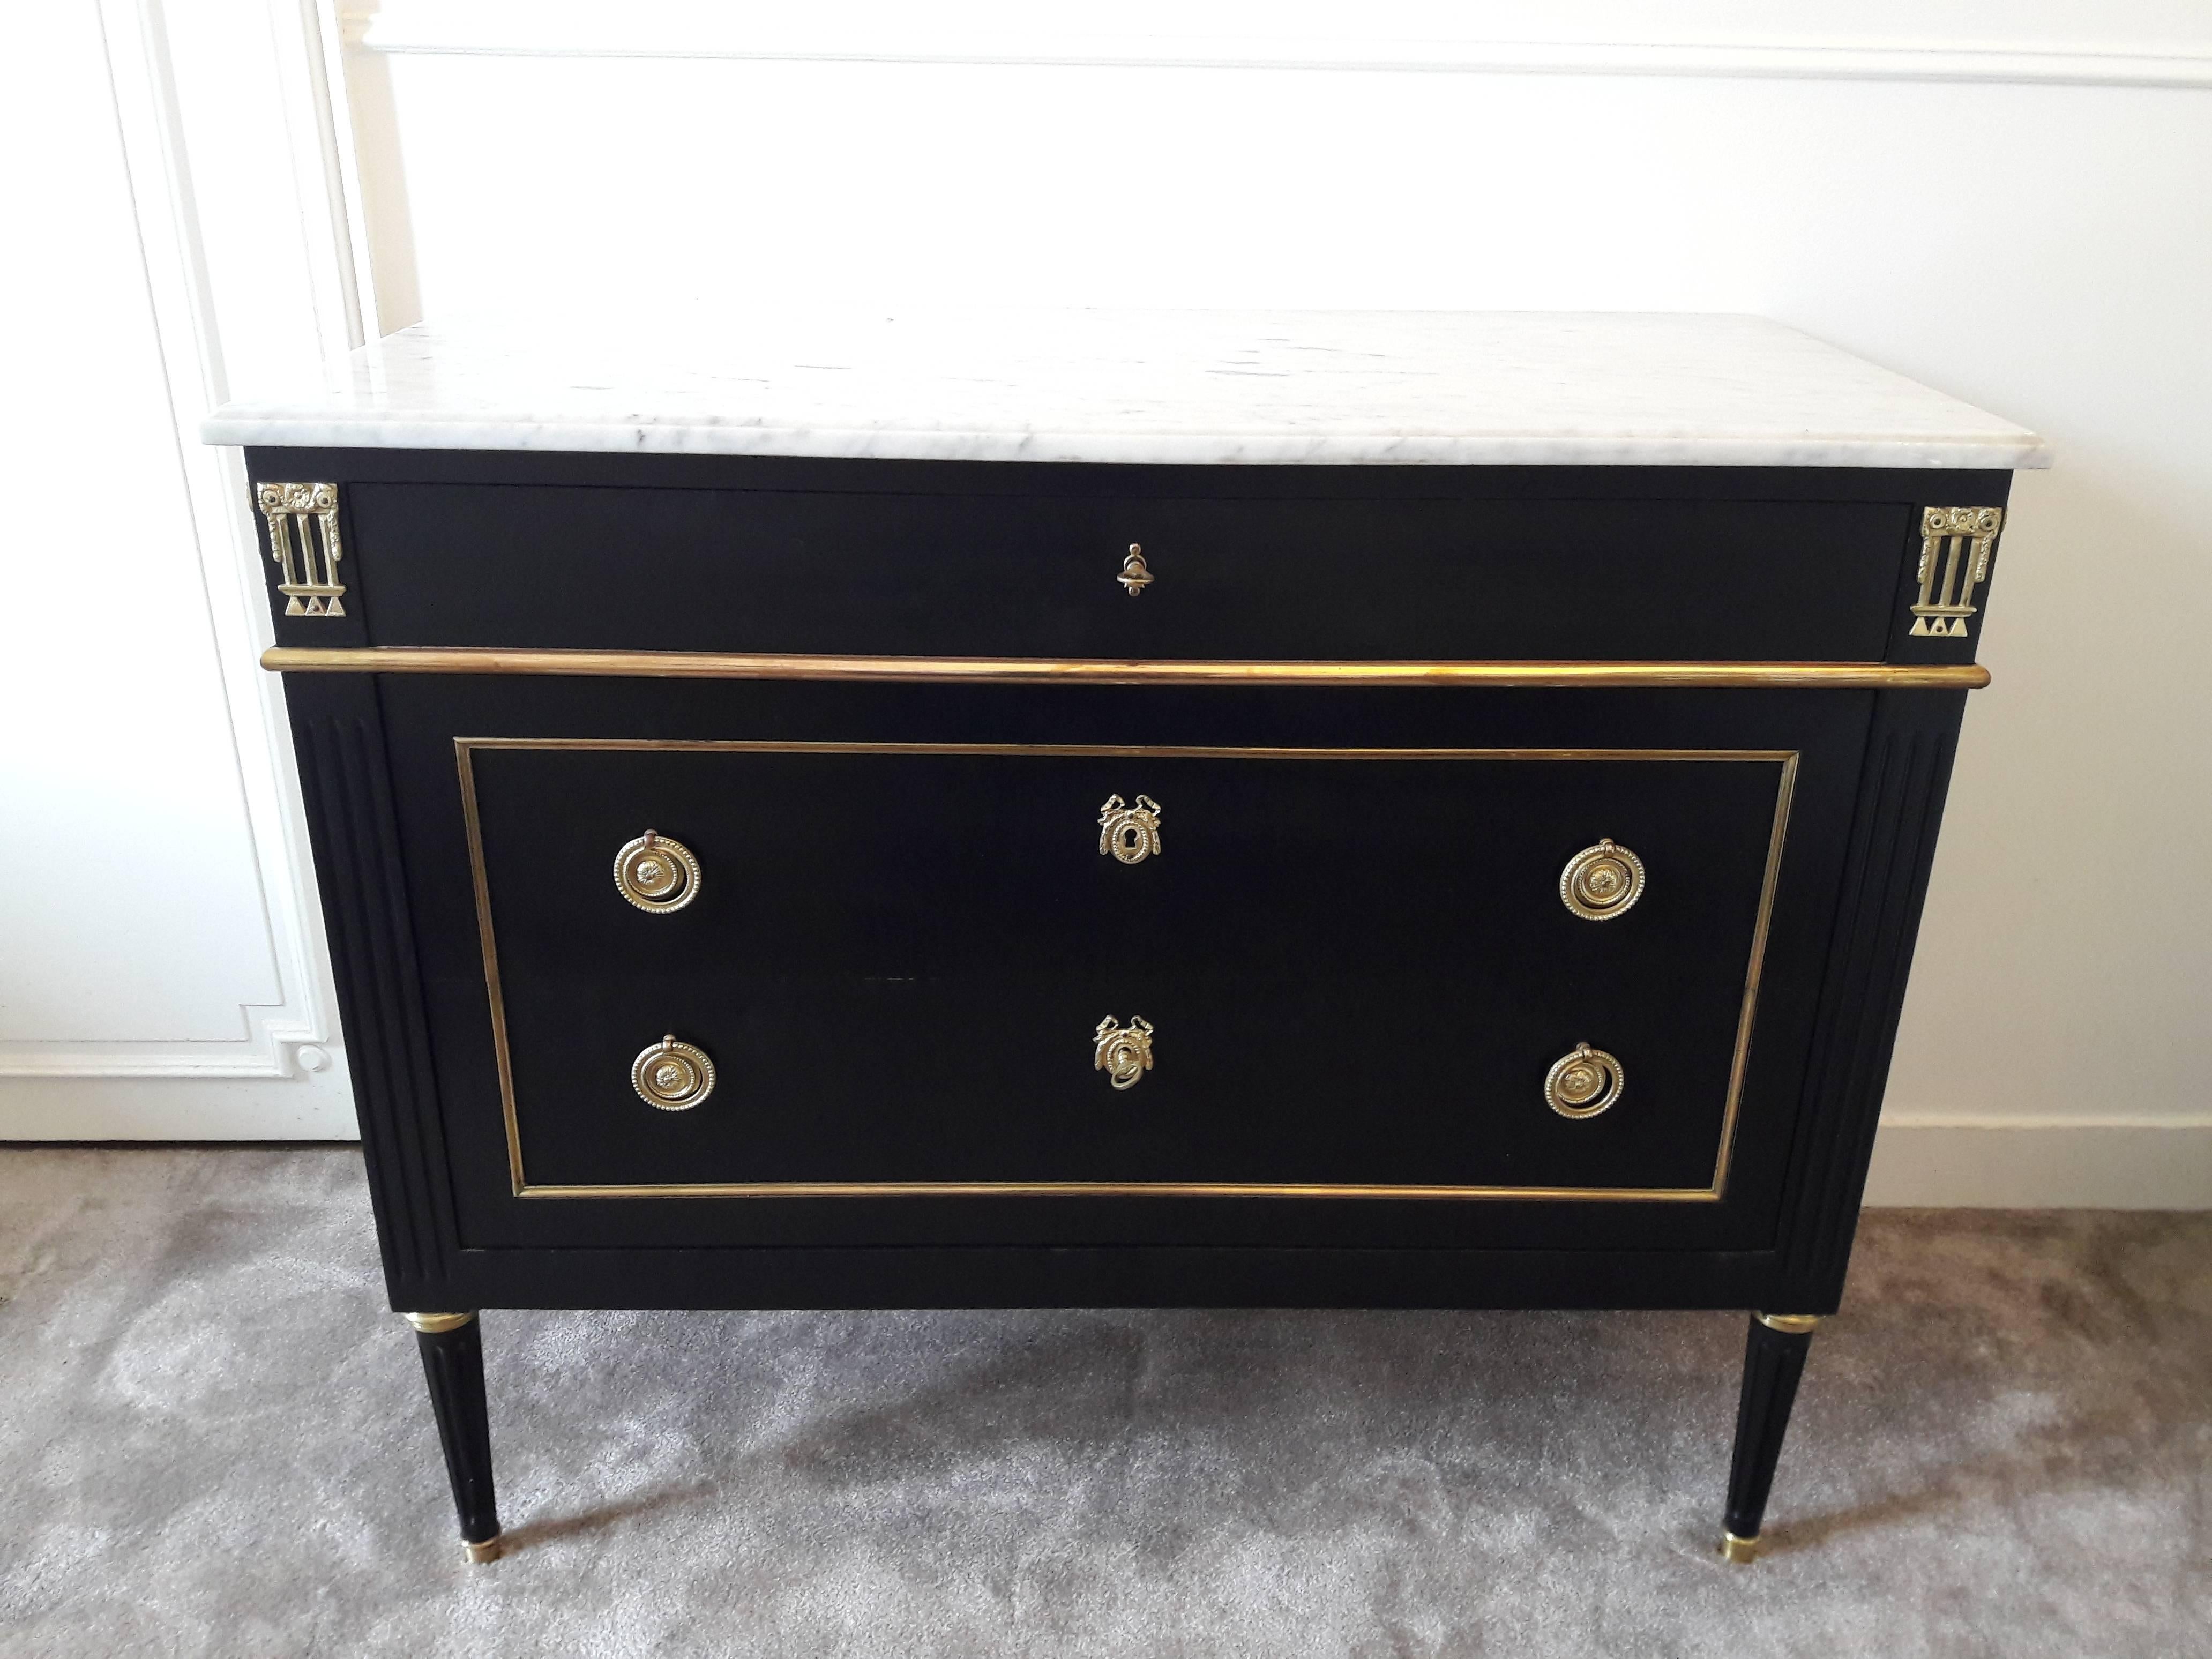 Antique French, Louis XVI style chest of drawers topped with a white Carrara marble, fluted legs finished with golden bronze clogs. Three dovetailed drawers with bronze and brass details.
The first finer drawer is also more discreet.
The woodworking